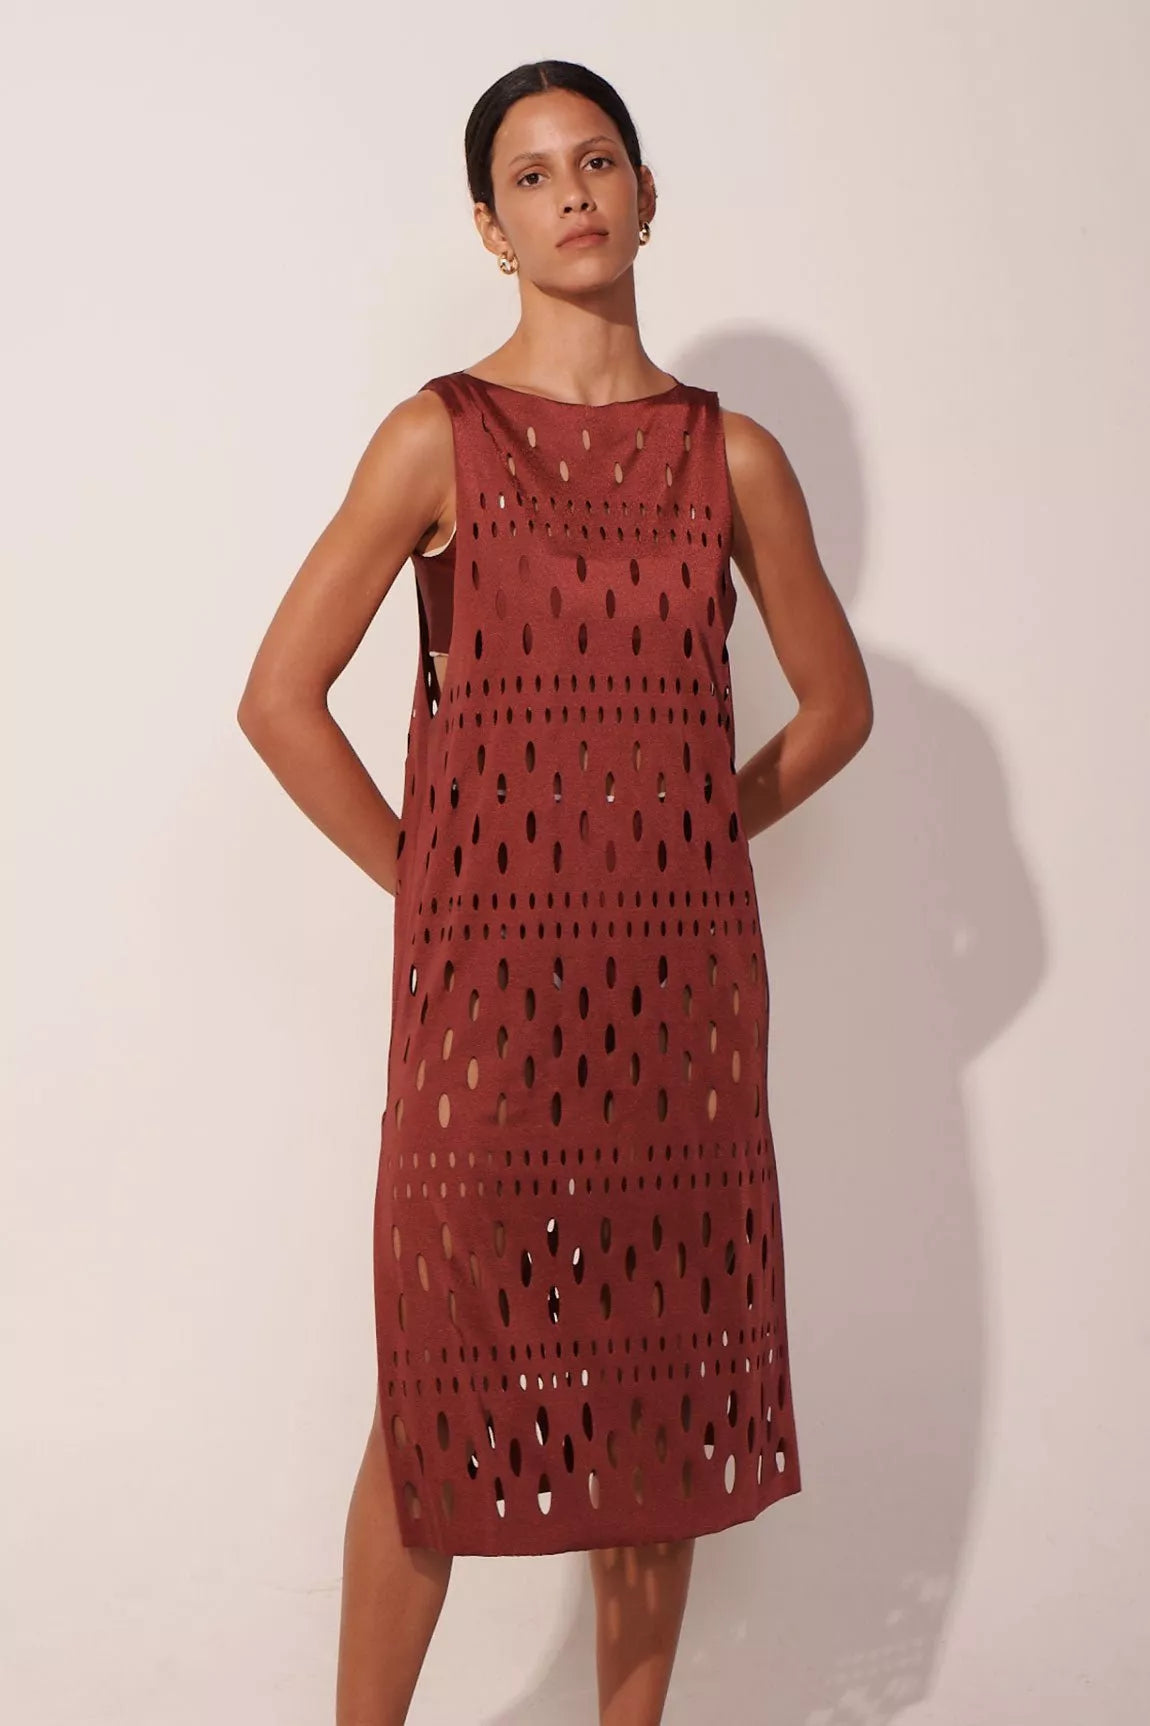 The Summer Dreammer Dress Red Wine - ANCORA